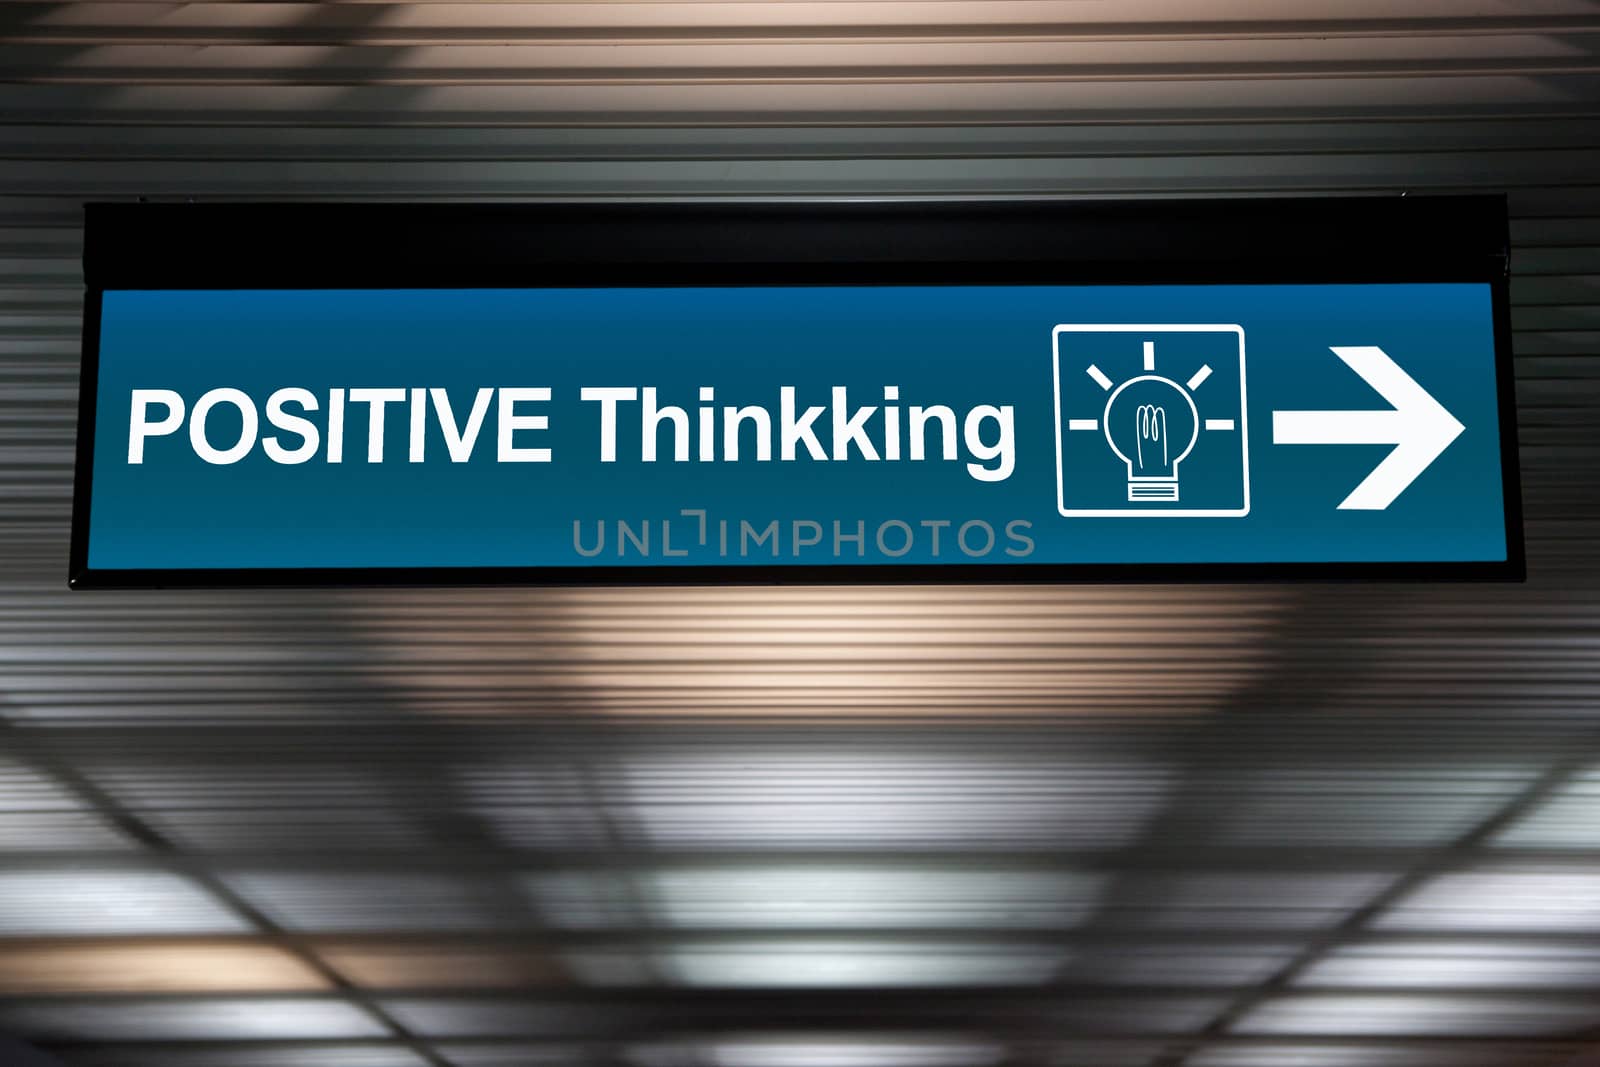 think positive concept. sign positive thinking with lightbulb icon and arrow for direction.